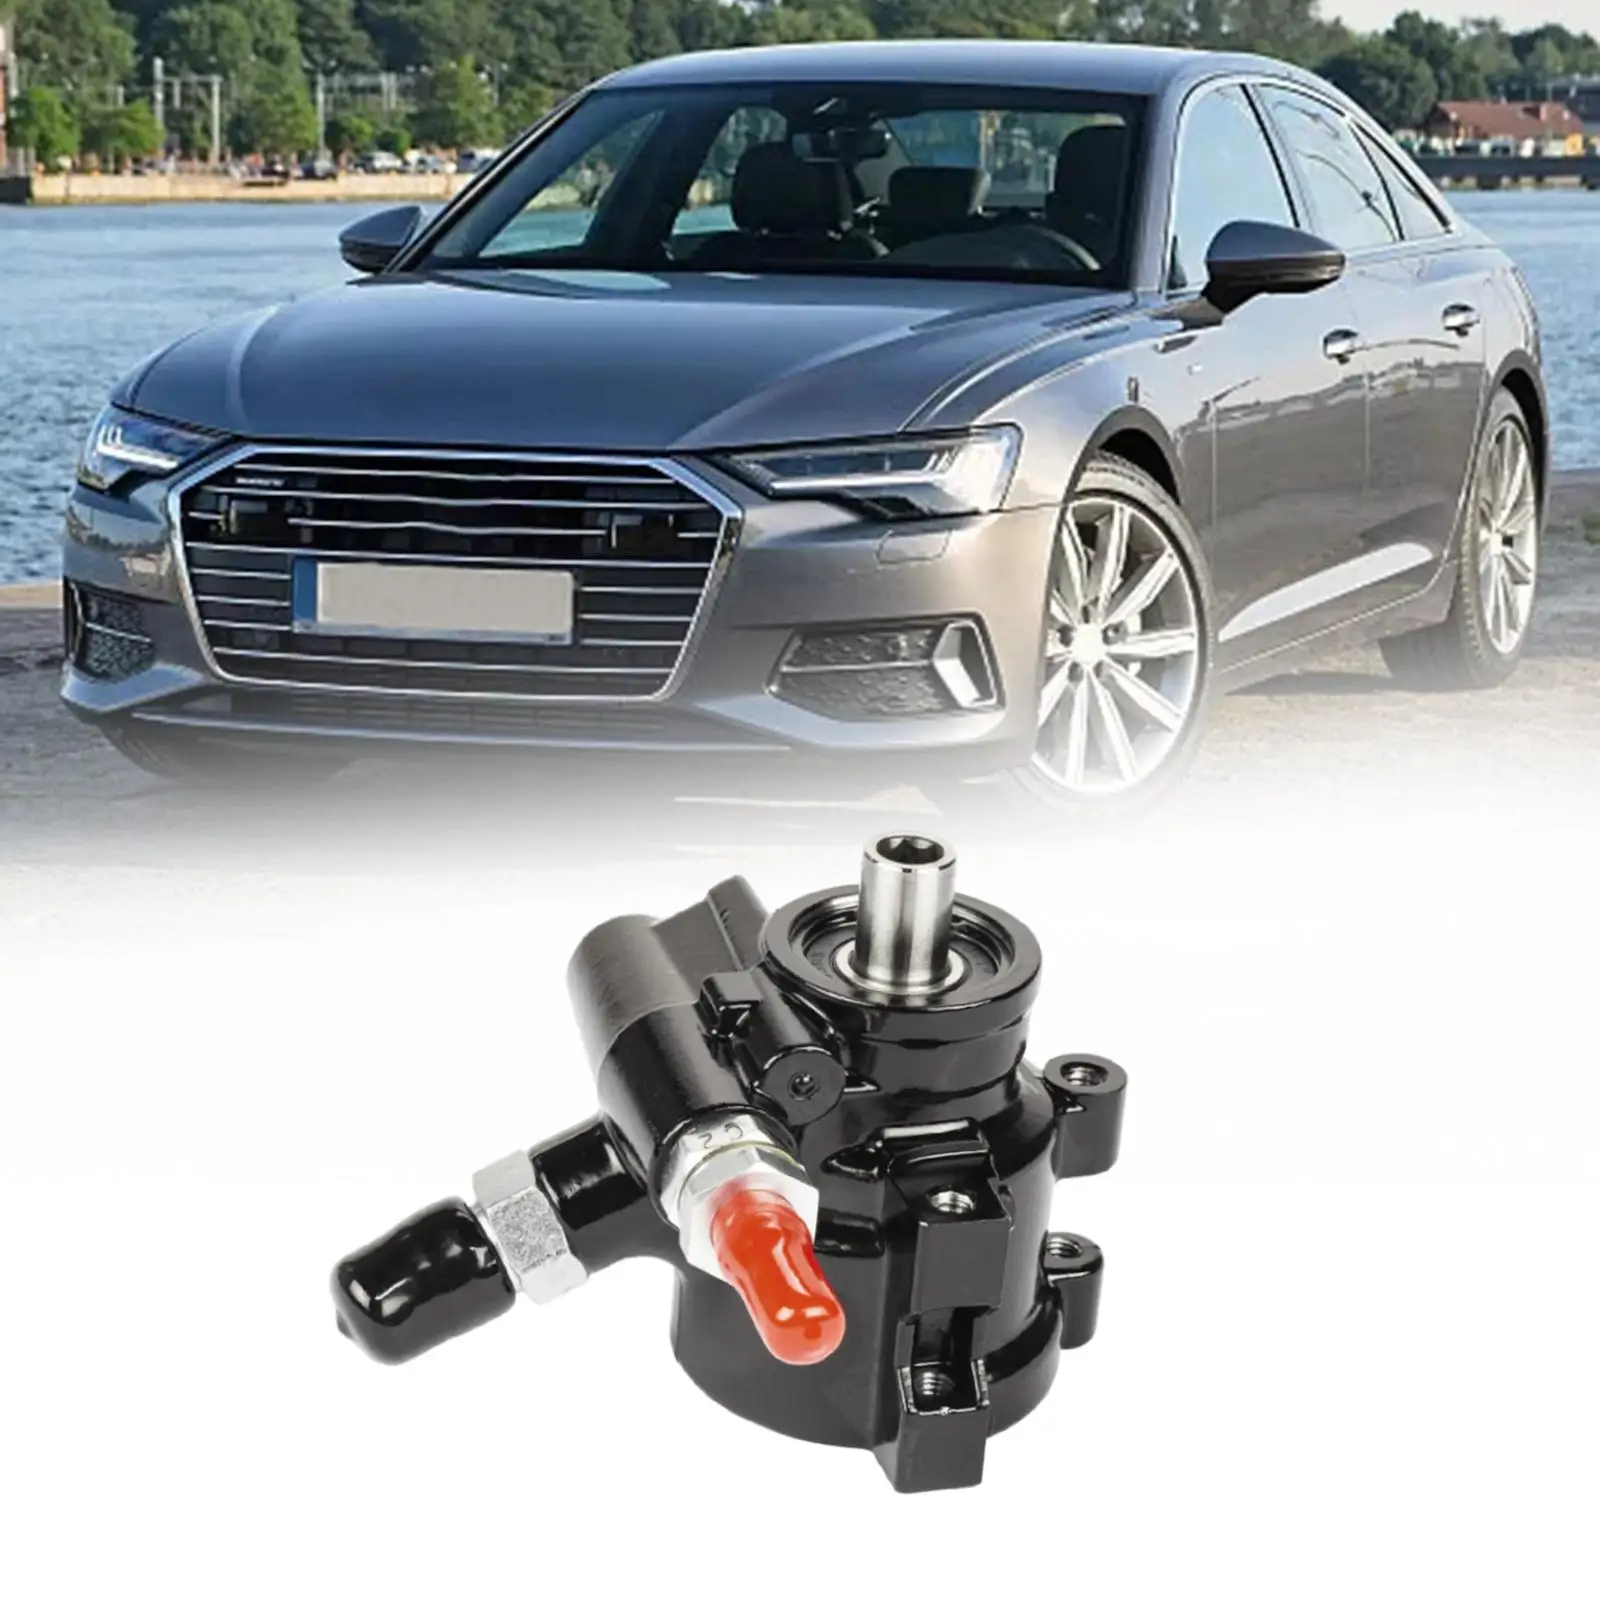 Power Steering Pump Replacement Car Accessories for Saginaw TC Type 2 Premium Easy to Install High Performance